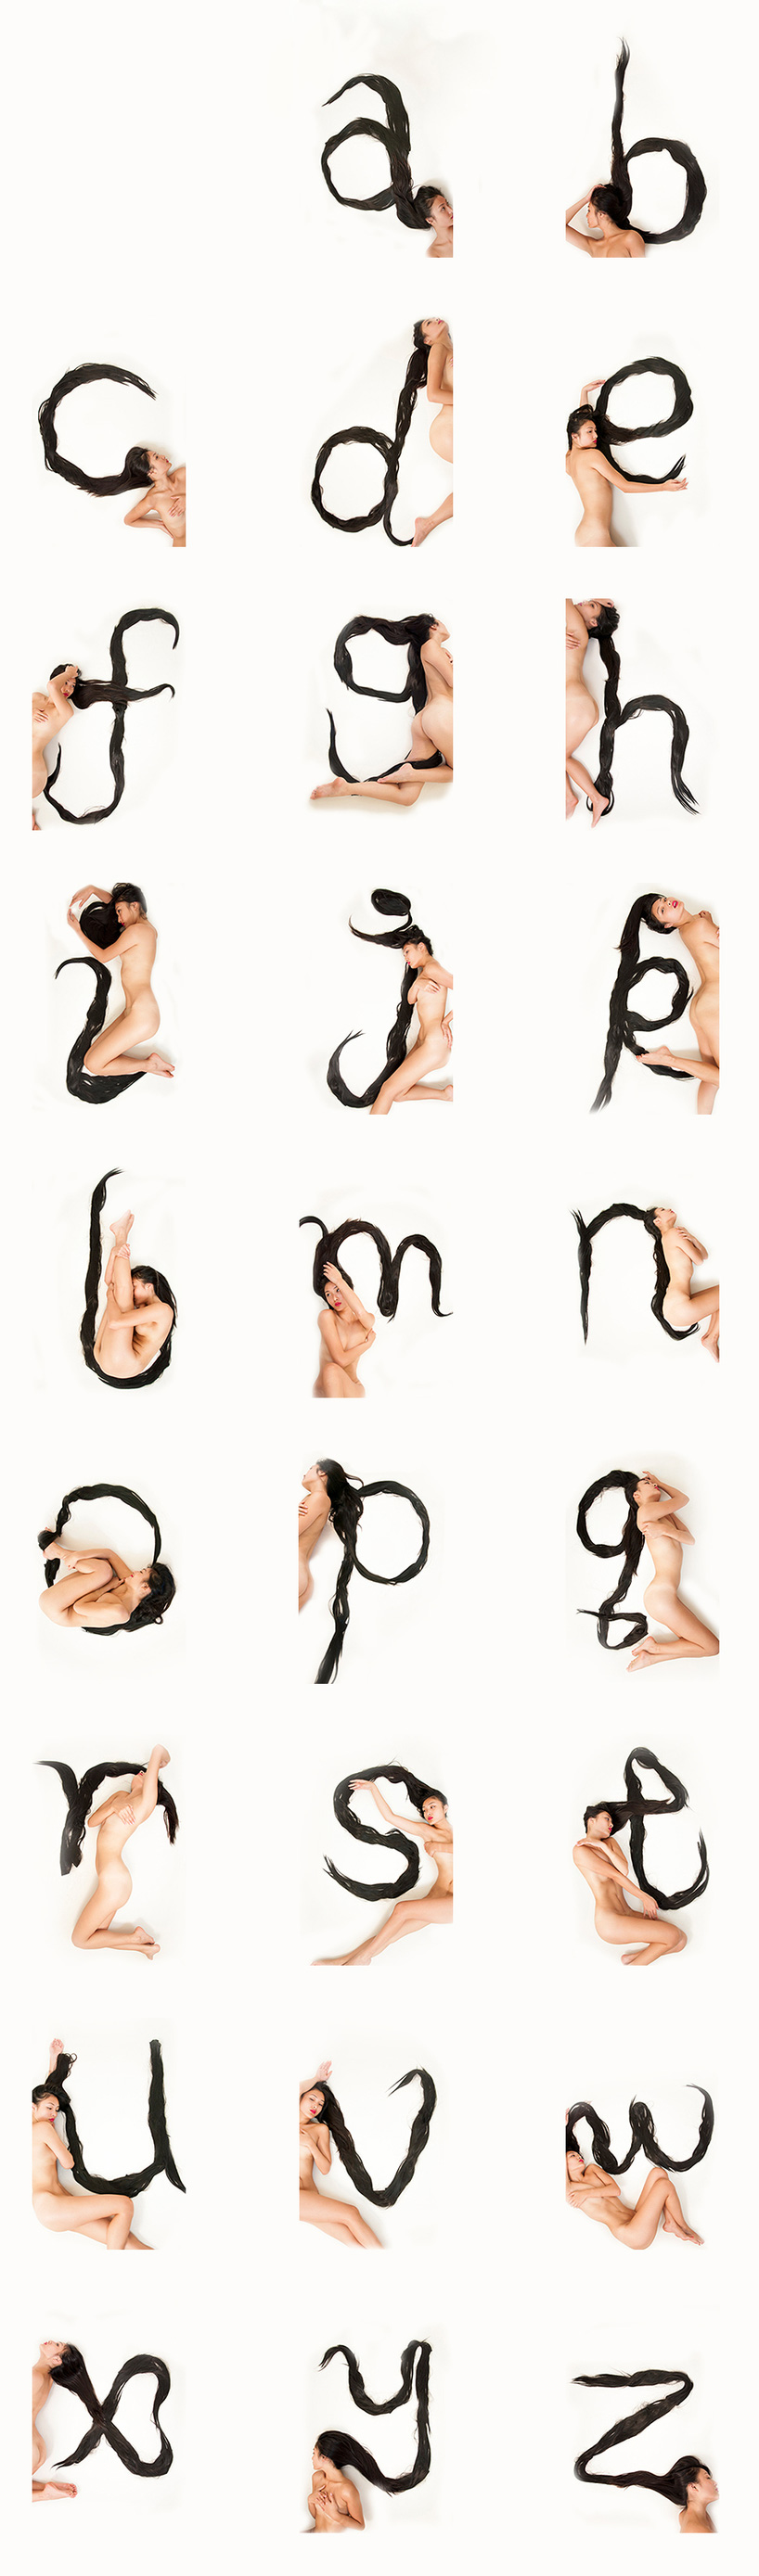 shurong diao forms hair alphabet from her long locks